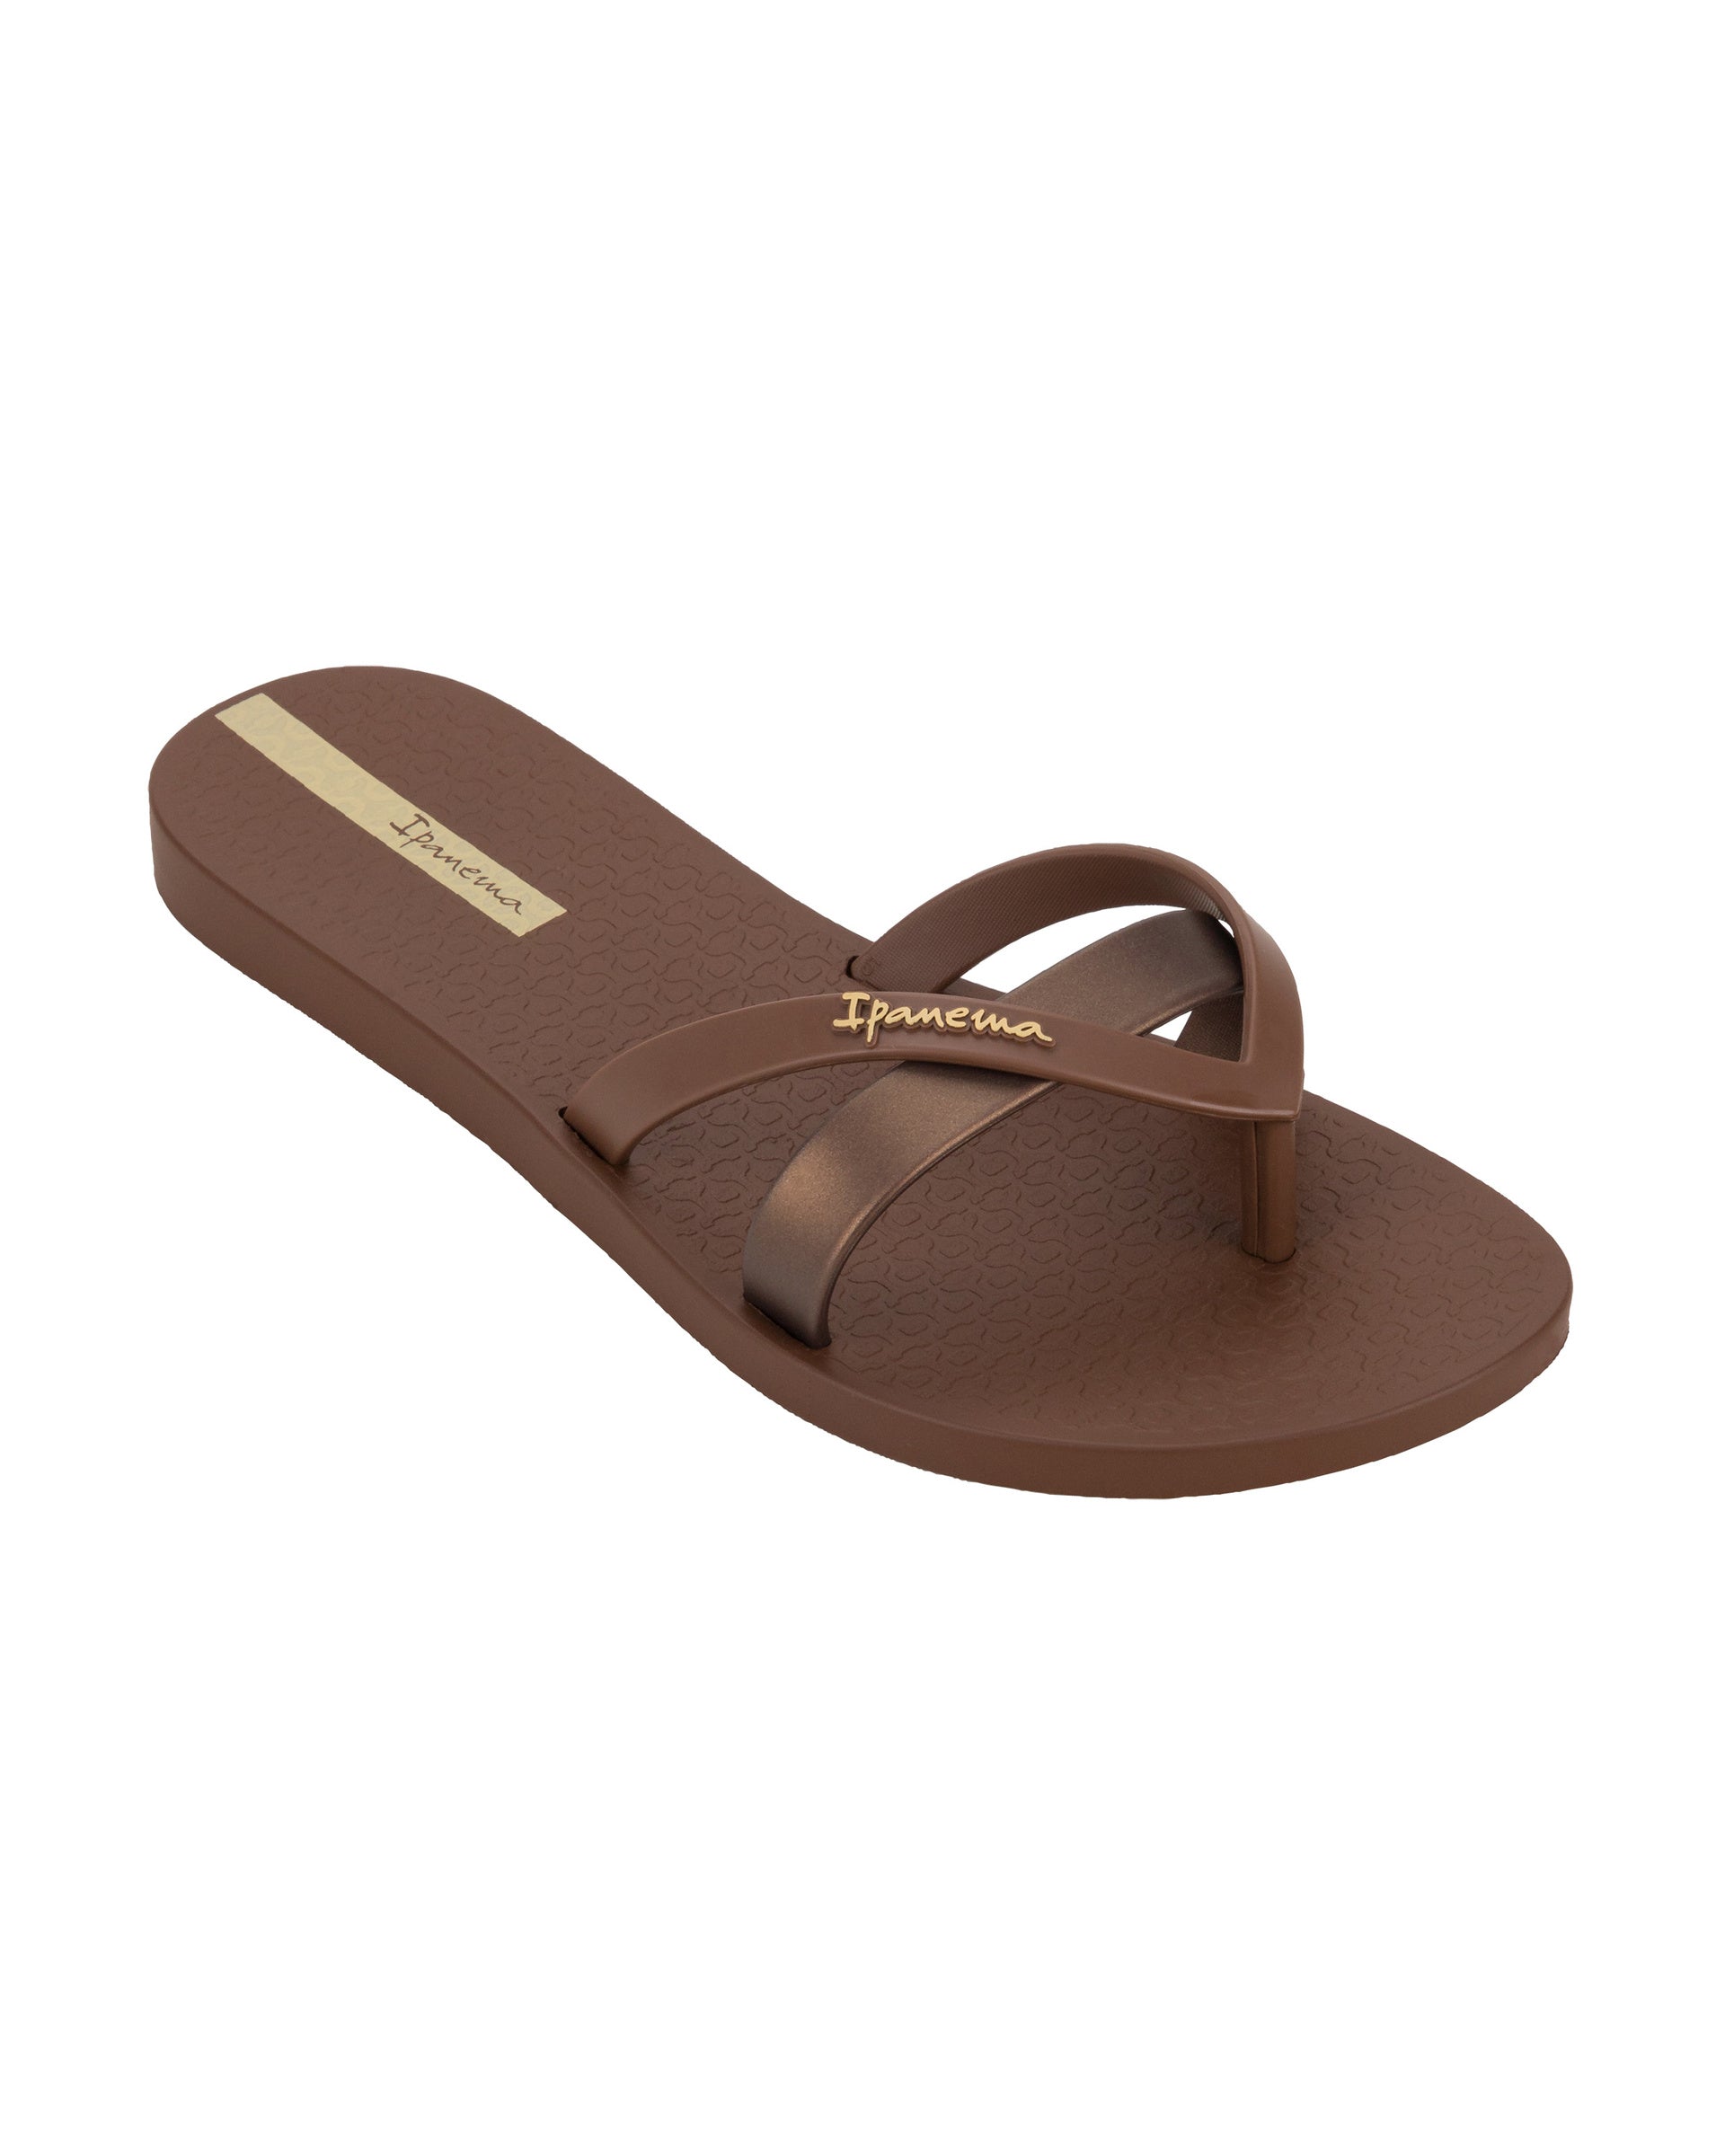 Angled view of a brown Ipanema Kirei women's flip flop.